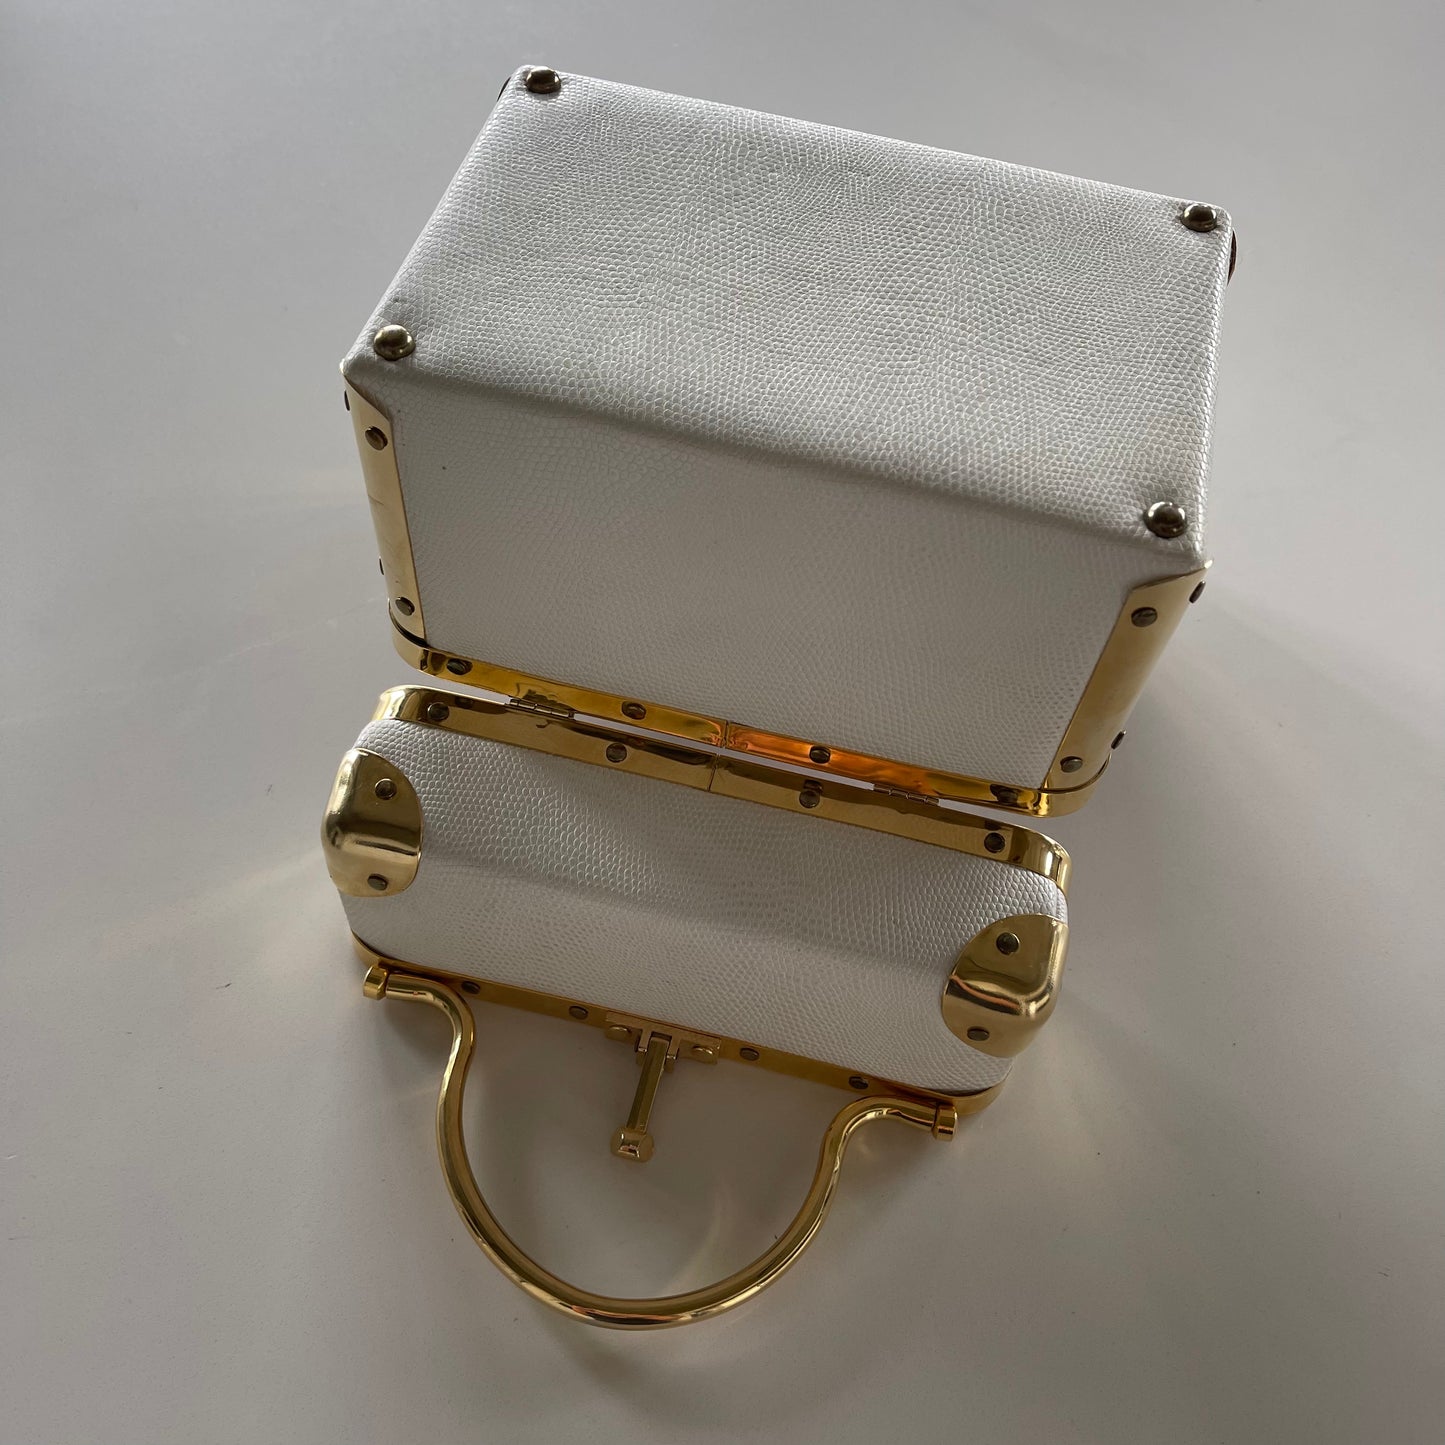 Vintage 60’s Trunk Bag in White Leather with Gold Hardware by Lizette New York